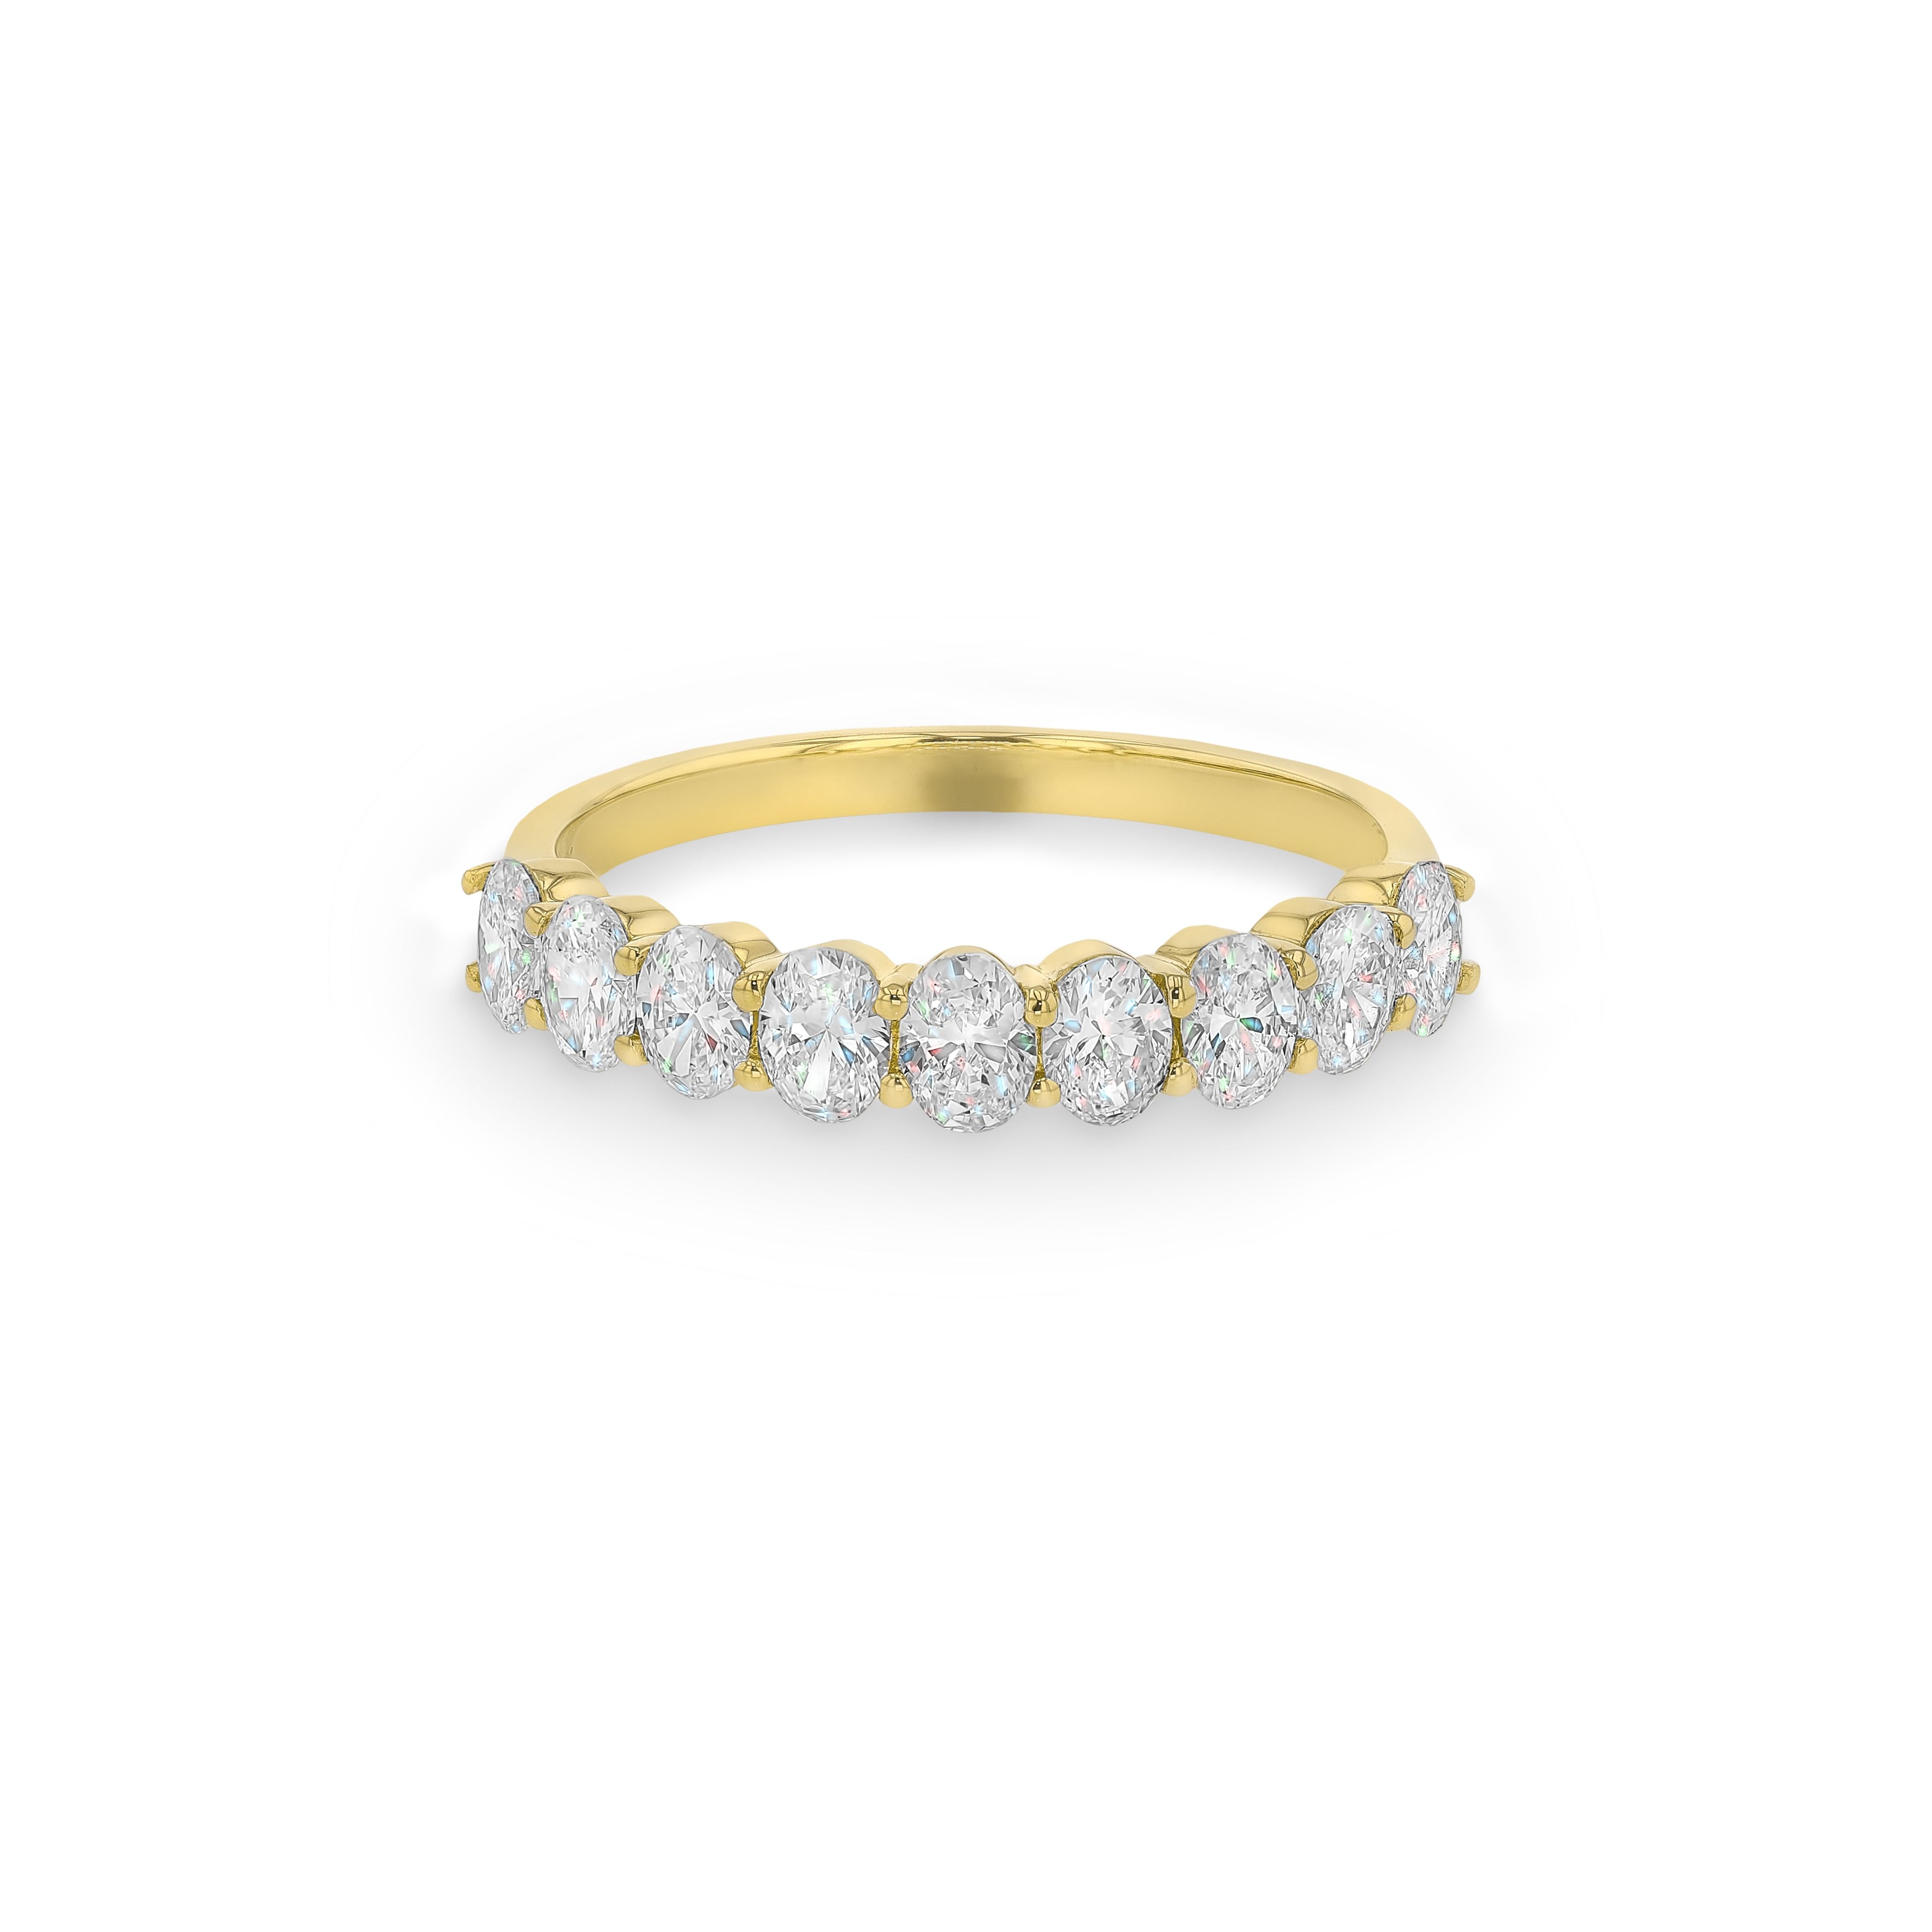 18ct Yellow Gold Diamond Ring 1.00ct TDW - Free Delivery and 5